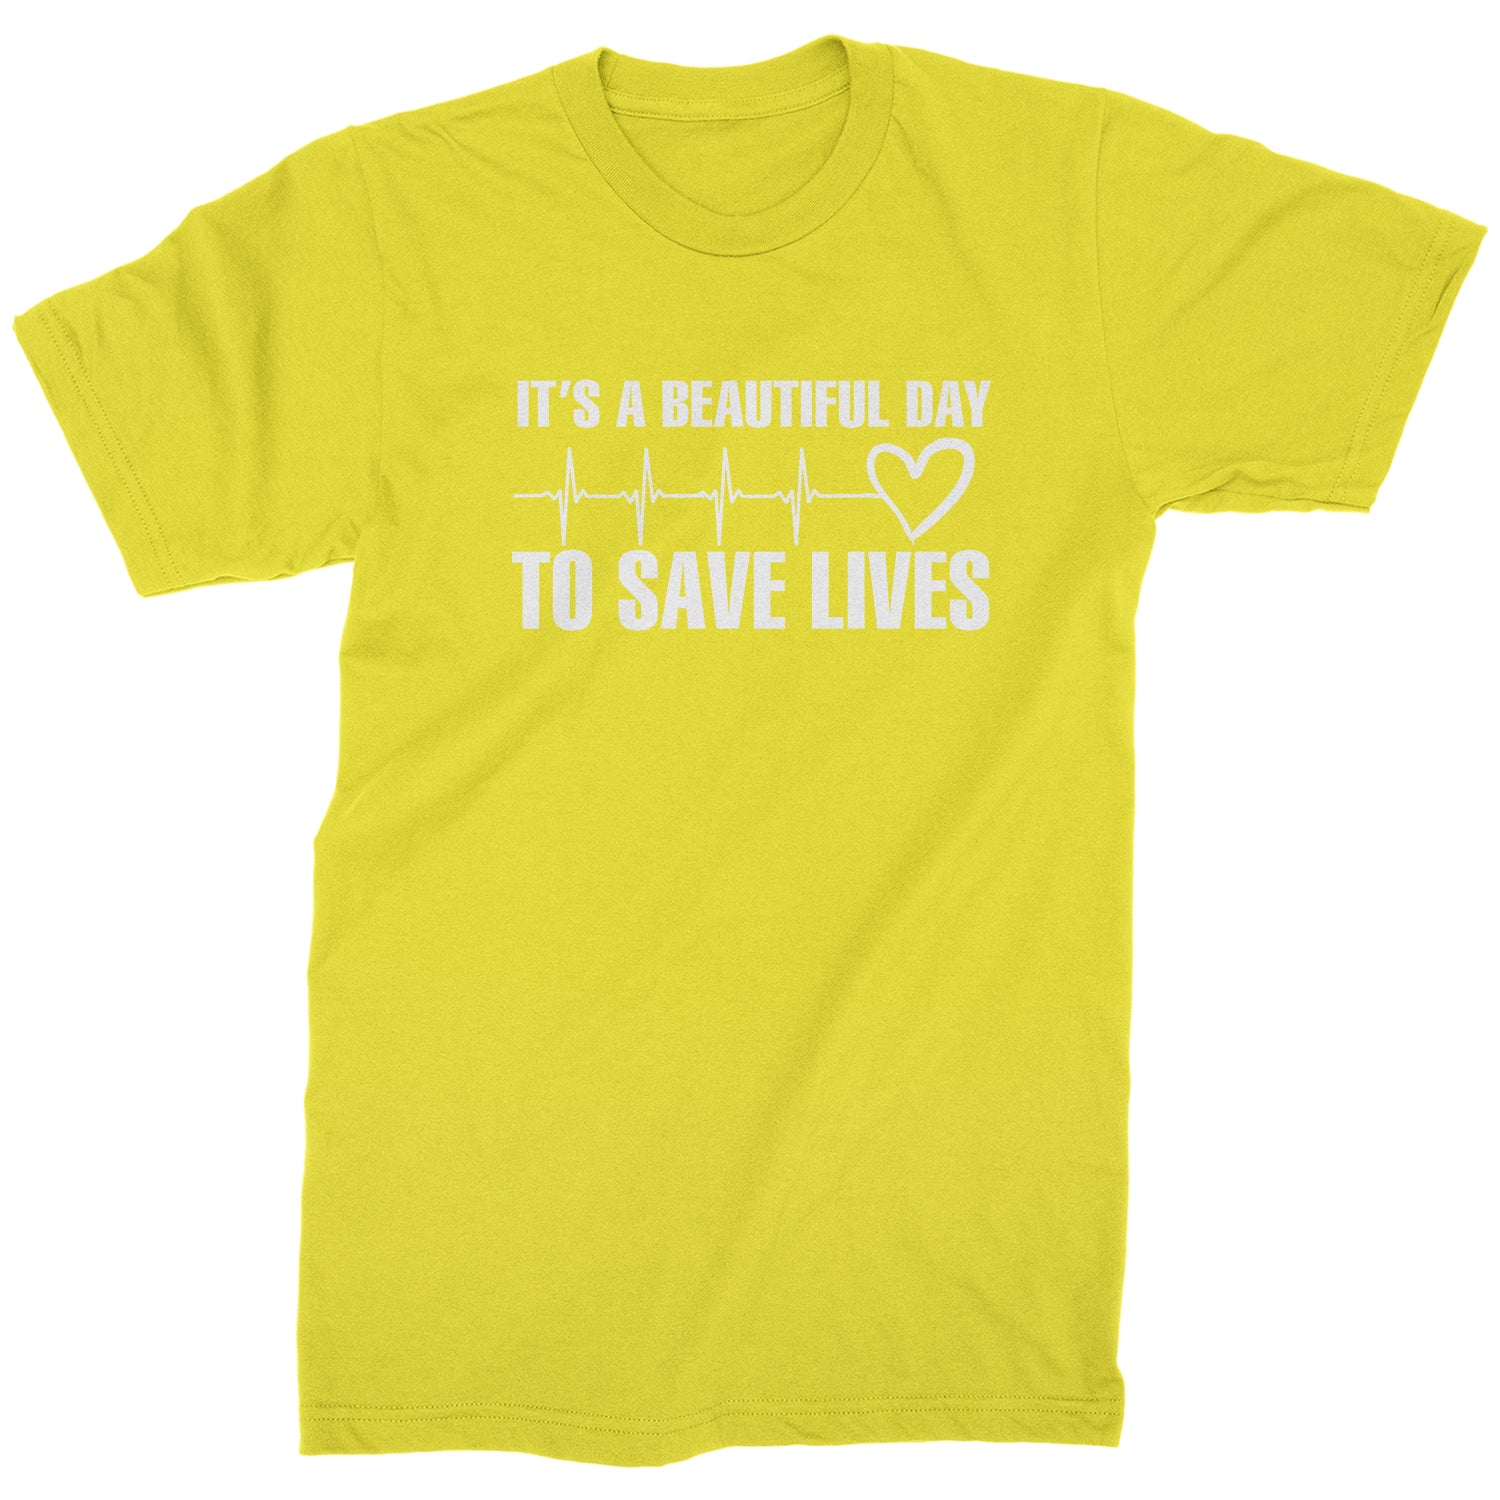 It's A Beautiful Day To Save Lives (White Print) Mens T-shirt #expressiontees by Expression Tees